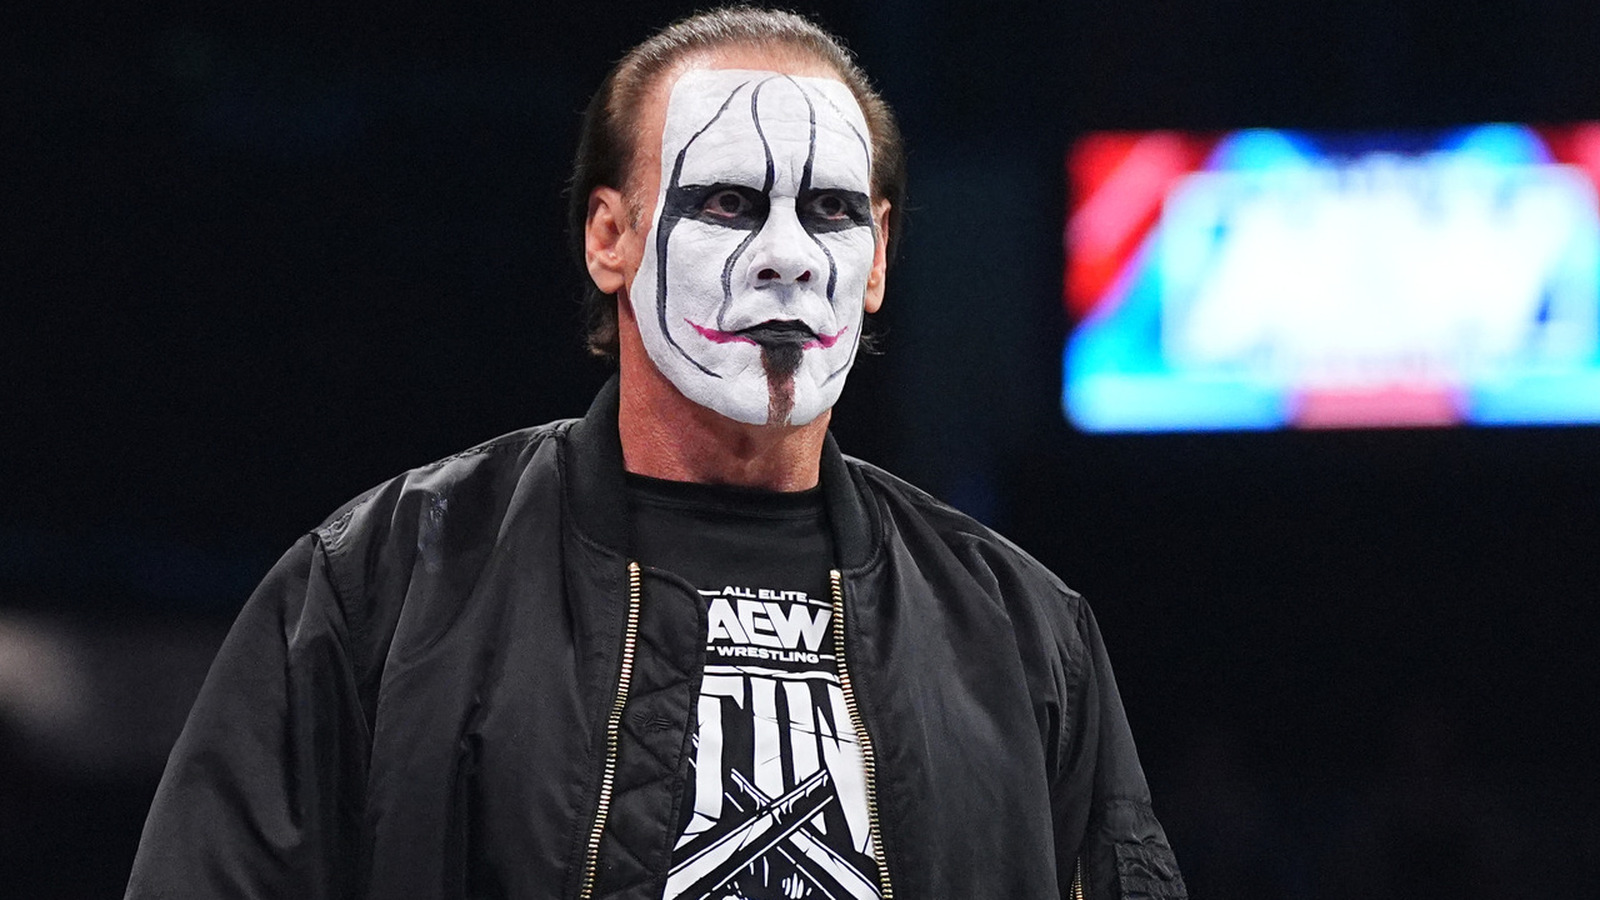 Sting Announces Impending Retirement, Will Wrestle Last Match At AEW